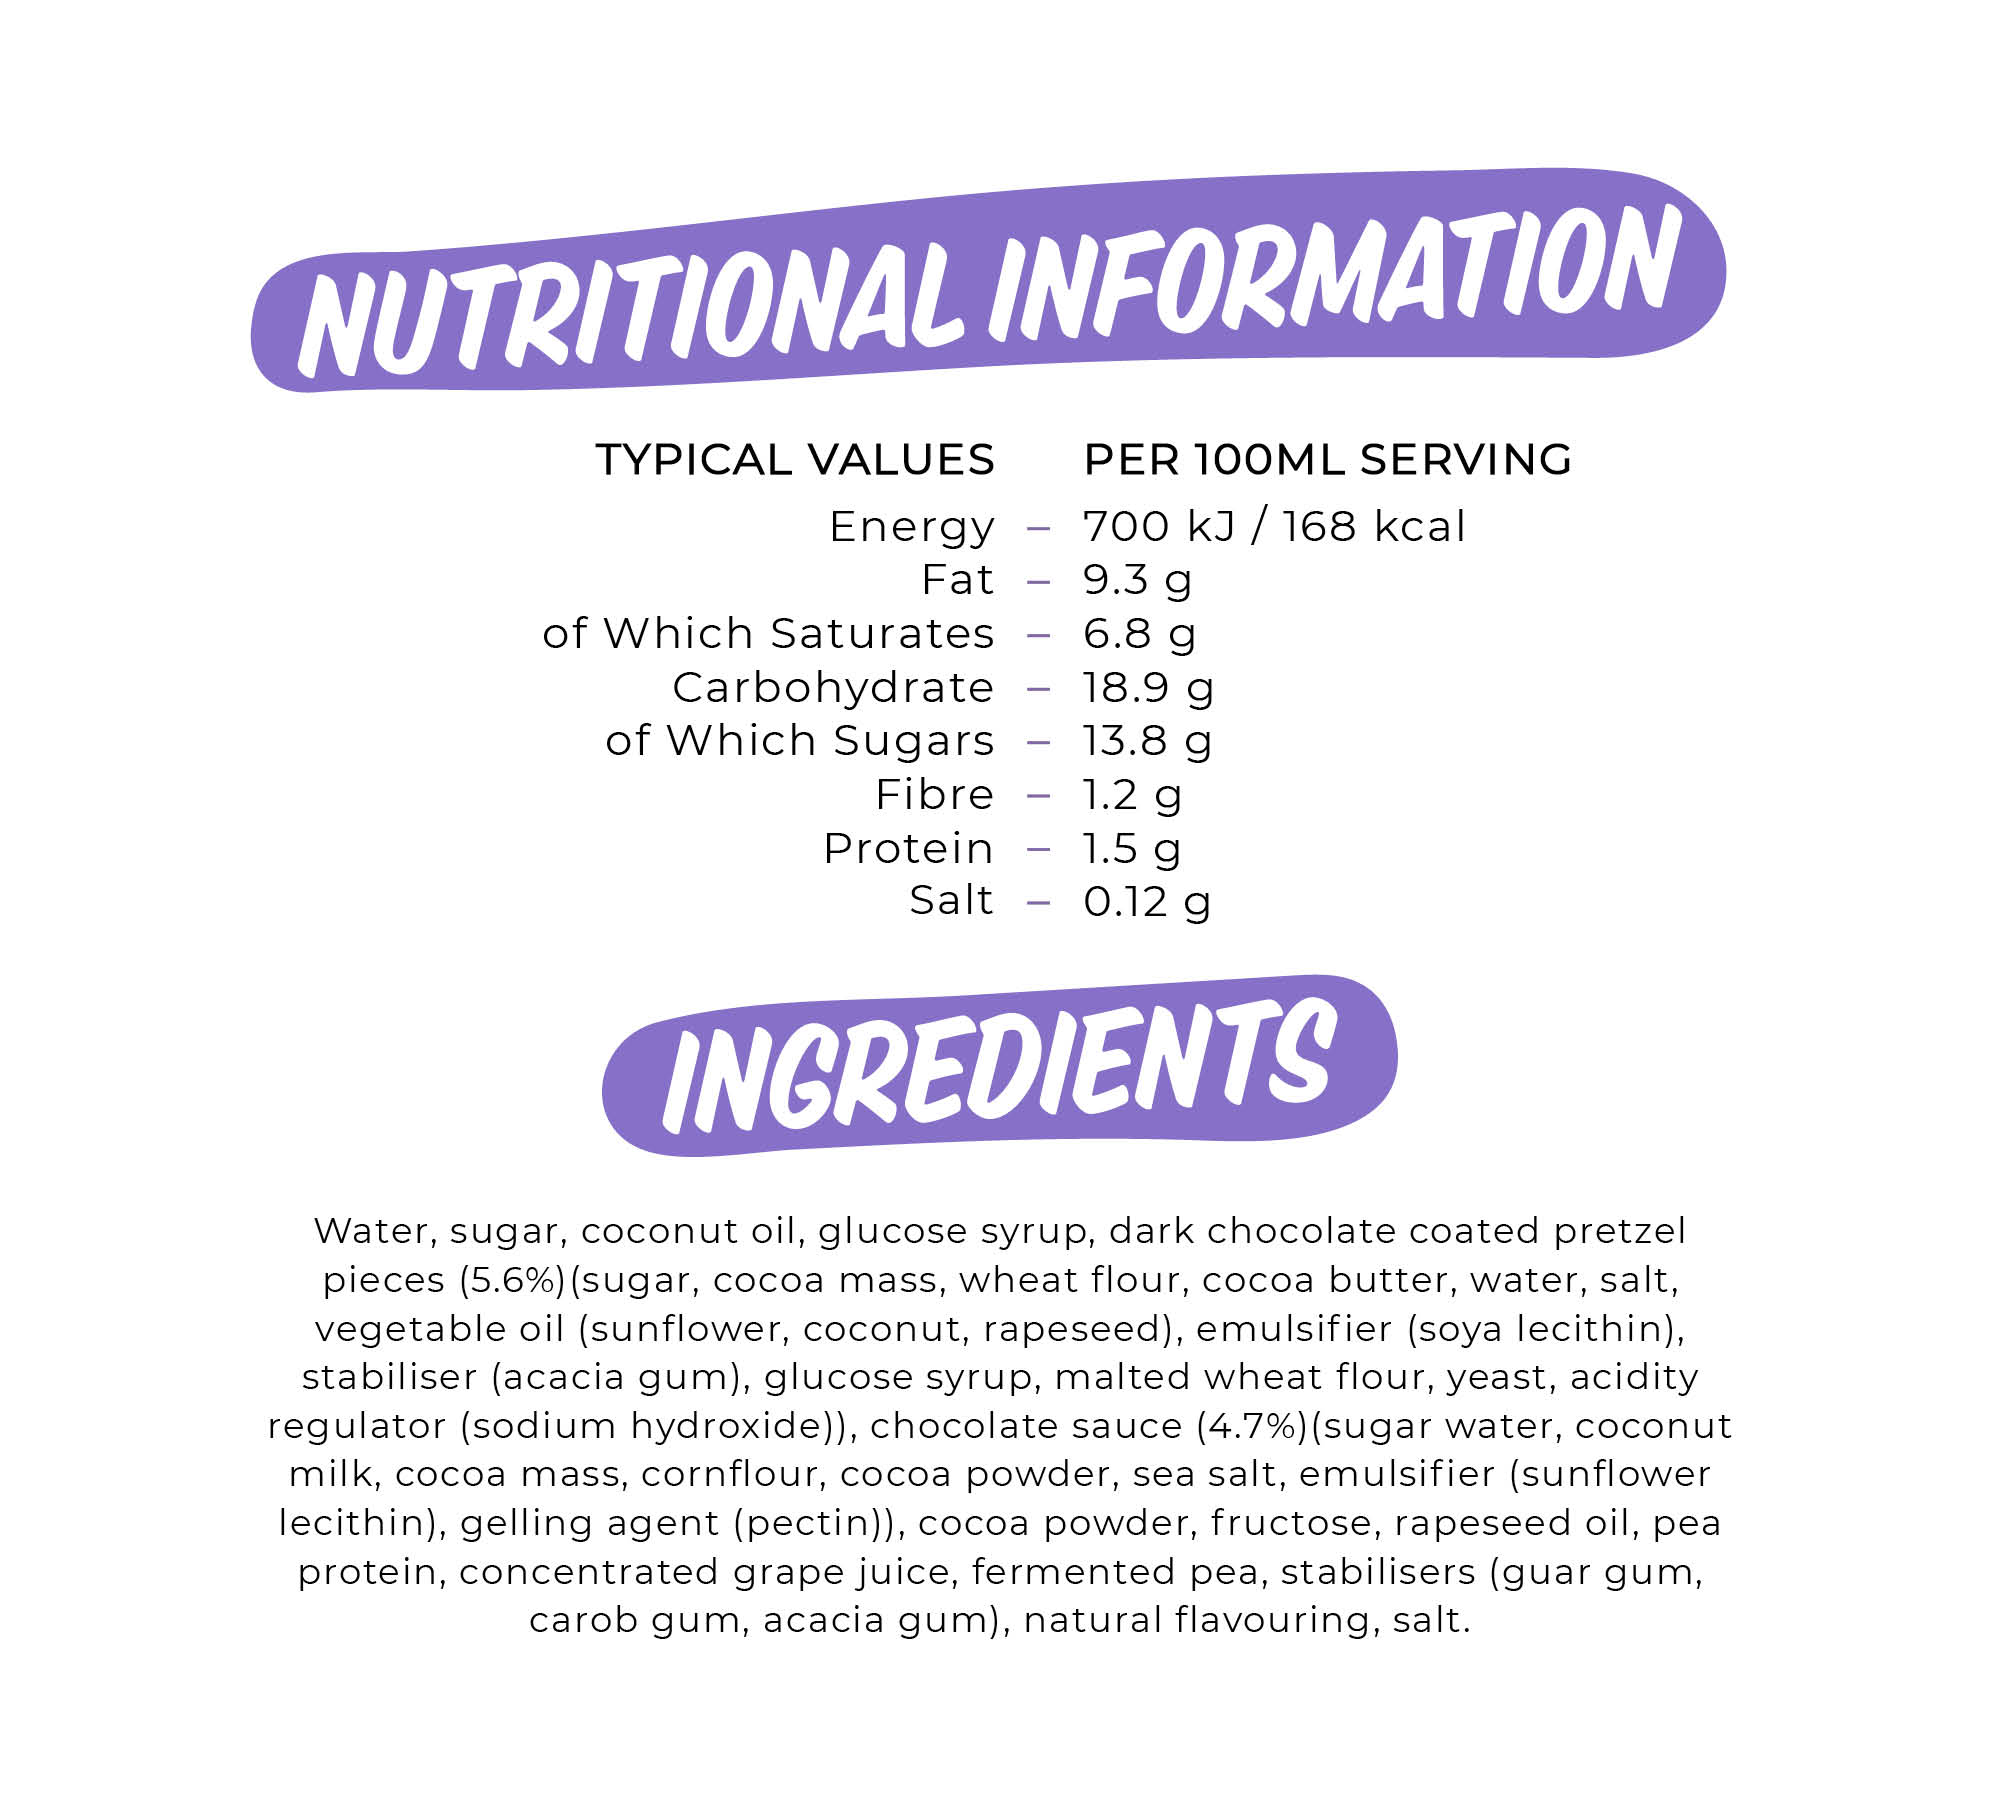 TYPICAL VALUES PER 100M L SERVING Energy 700 kJ /168 kcal Fat 9.3 g of Which Saturates 6.8 g Carbohydrate 18.9 g of Which Sugars 13.8 g Fibre 1 2 g Protein 1.5 g Salt 012 g. Water, sugar, coconut oil, glucose syrup, dark chocolate coated pretzel pieces (5.6%)(sugar, cocoa mass, wheat flour, cocoa butter, water, salt, vegetable oil (sunflower coconut, rapeseed), emulsifier (soya lecithin), stabiliser (acacia gum), glucose syrup, malted wheat flour, yeast, acidity regulator (sodium hydroxide)), chocolate sauce (4.7%)(sugar water, coconut milk, cocoa mass, cornflour, cocoa powder, sea salt, emulsifier (sunflower lecithin), gelling agent (pectin)), cocoa powder, fructose, rapeseed oil, pea protein, concentrated grape juice, fermented pea, stabilisers (guar gum, carob gum, acacia gum), natural flavouring, salt.